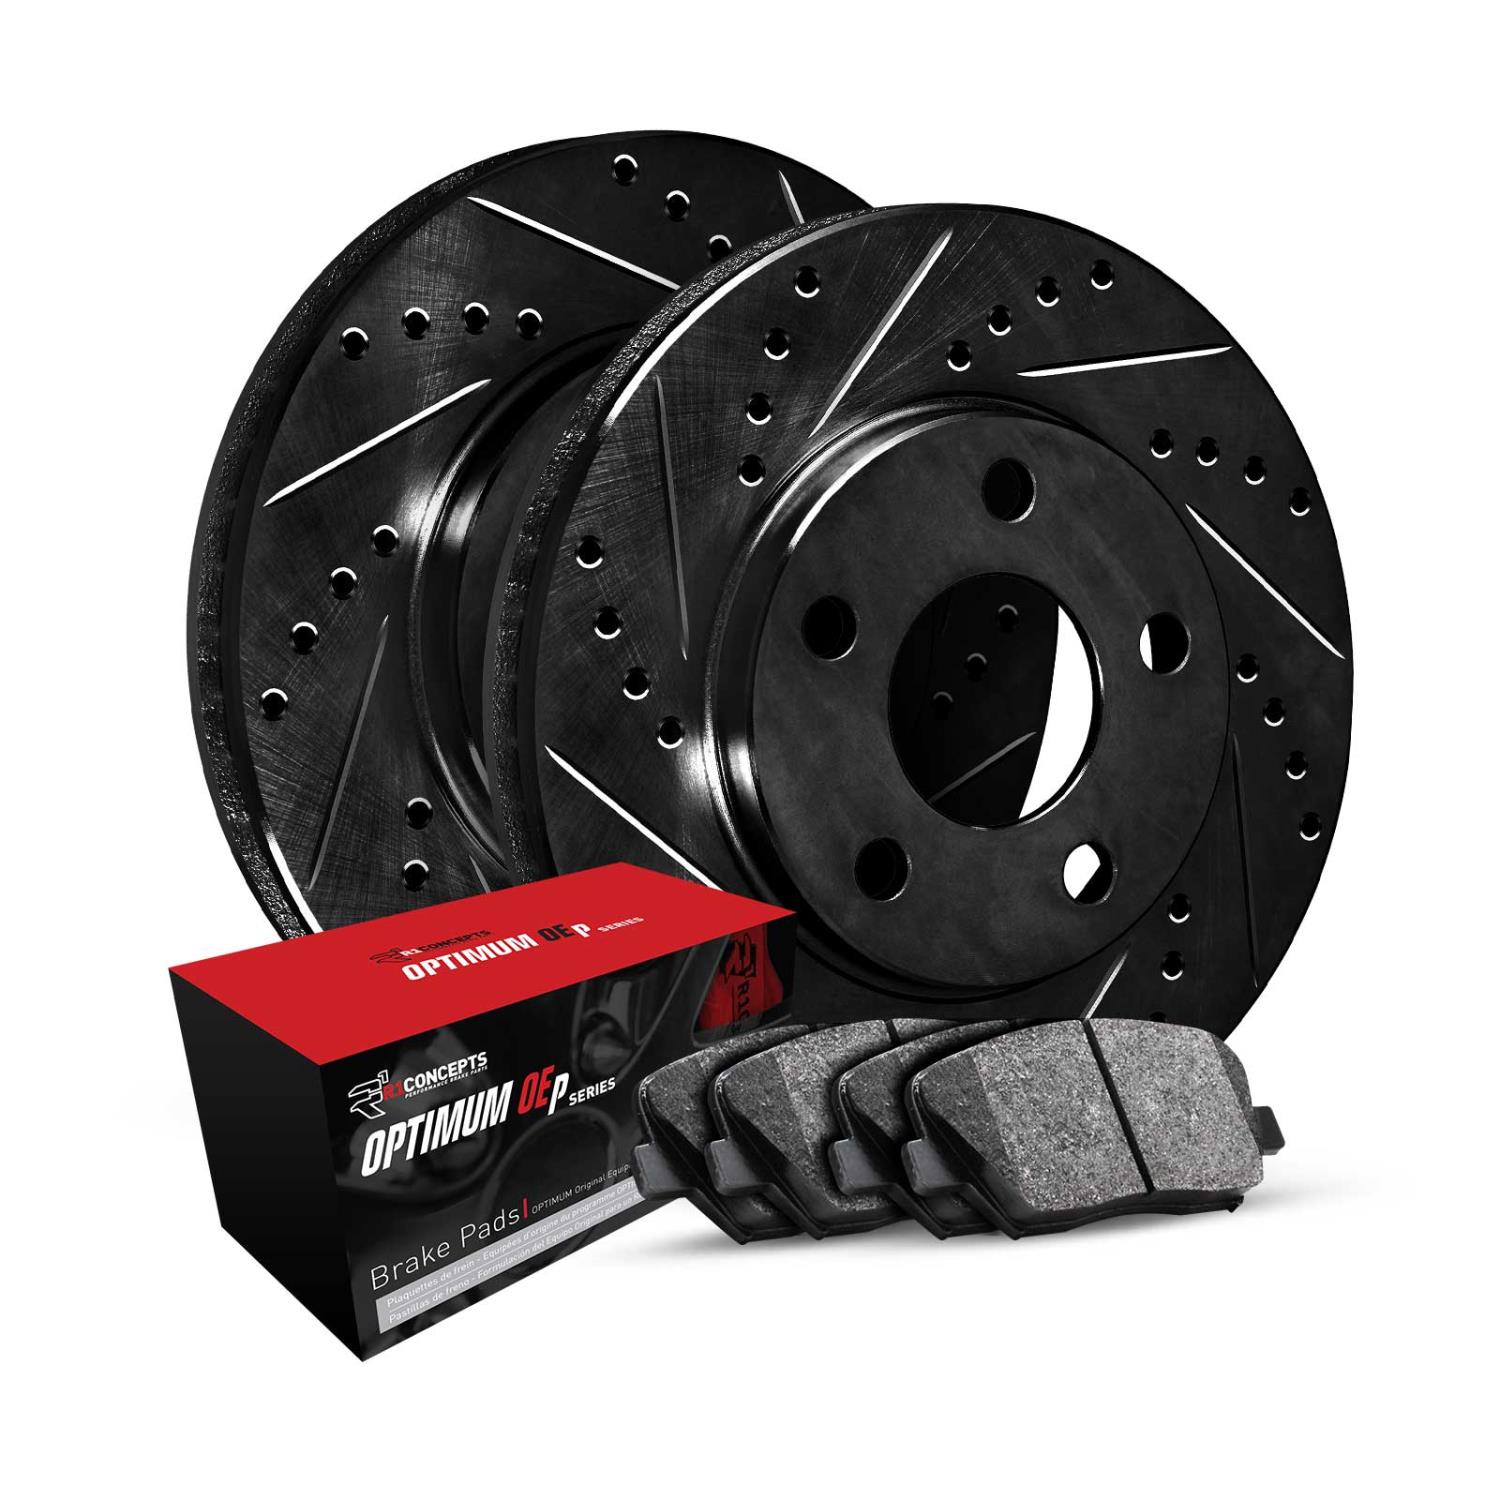 E-Line Drilled & Slotted Black Brake Rotor Set w/Optimum OE Pads, Fits Select Lexus/Toyota/Scion, Position: Rear